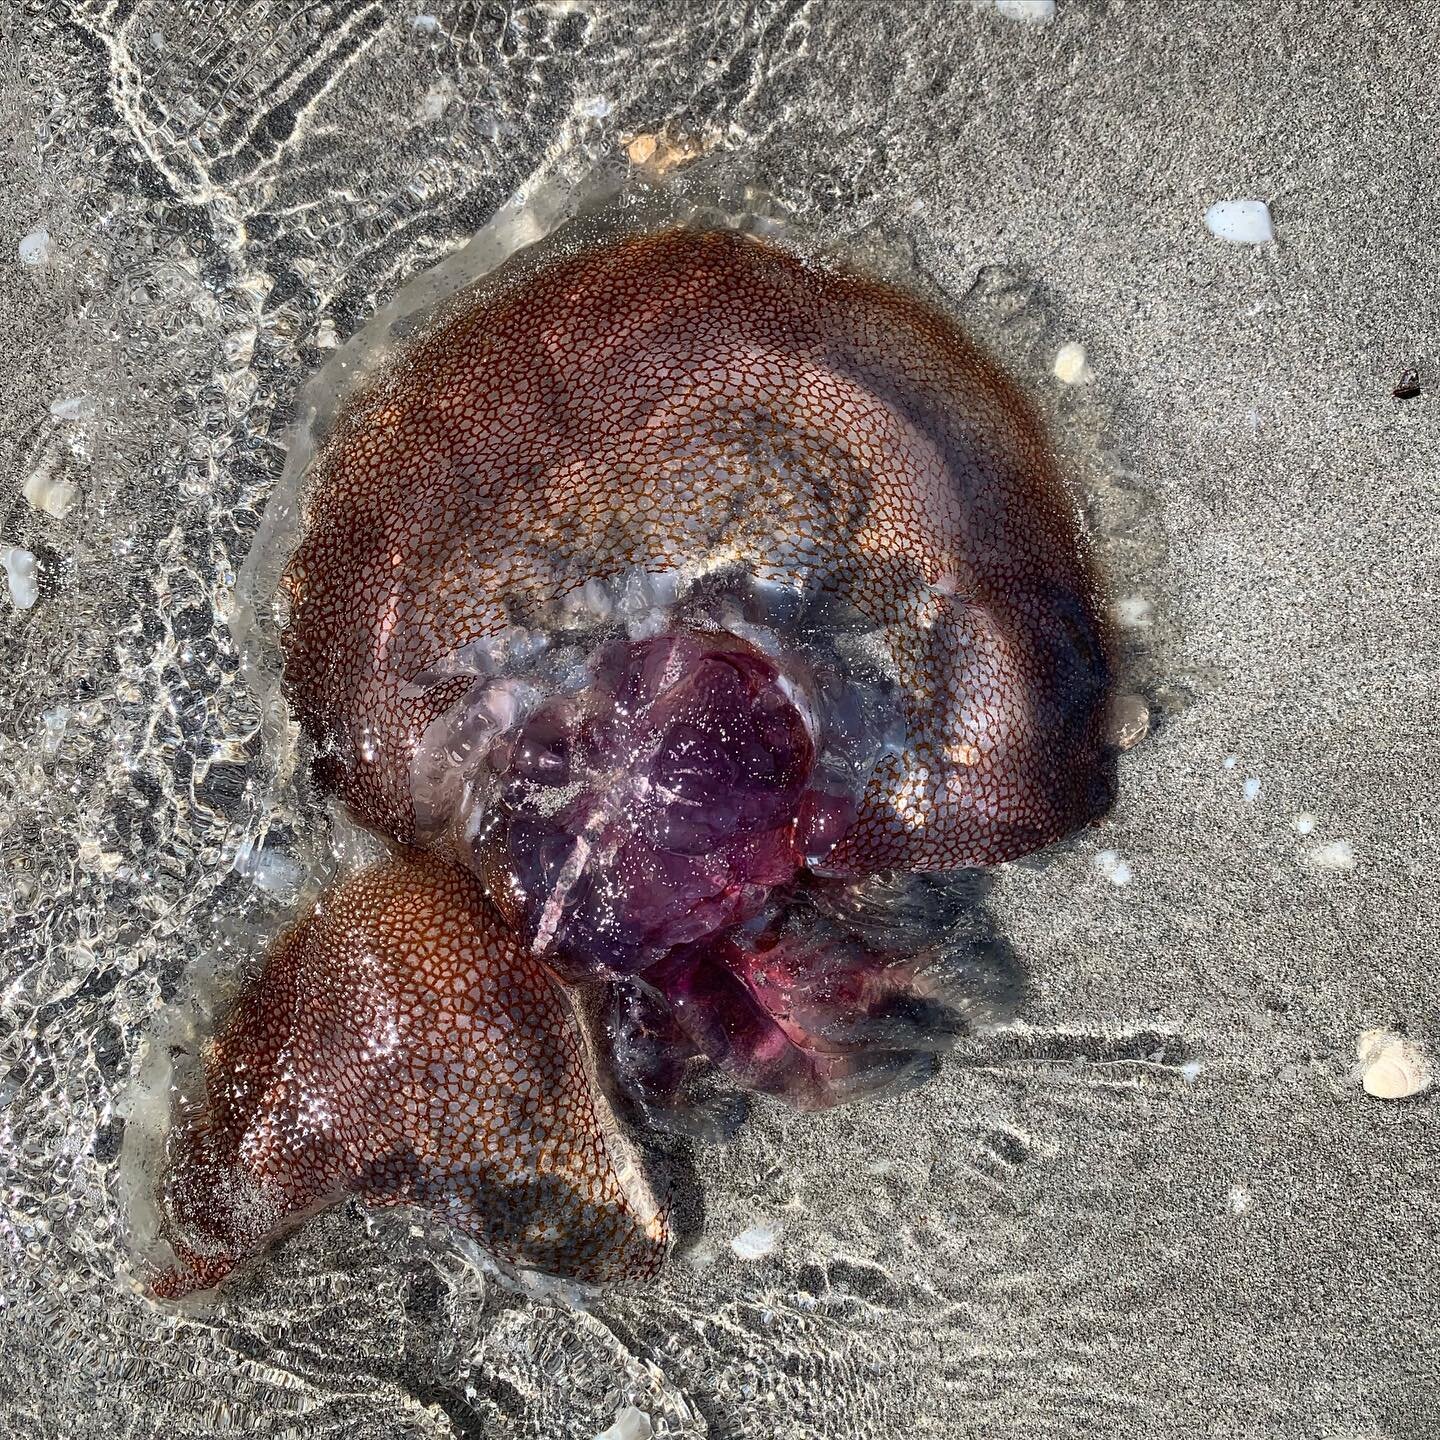 It all started with a jellyfish just like this. 

In my early 20&rsquo;s I experienced a mix of anxiety and depression (like many others) and I would drag myself to the beach for a walk to quieten my mind. 

On one particularly low day, I found a jel